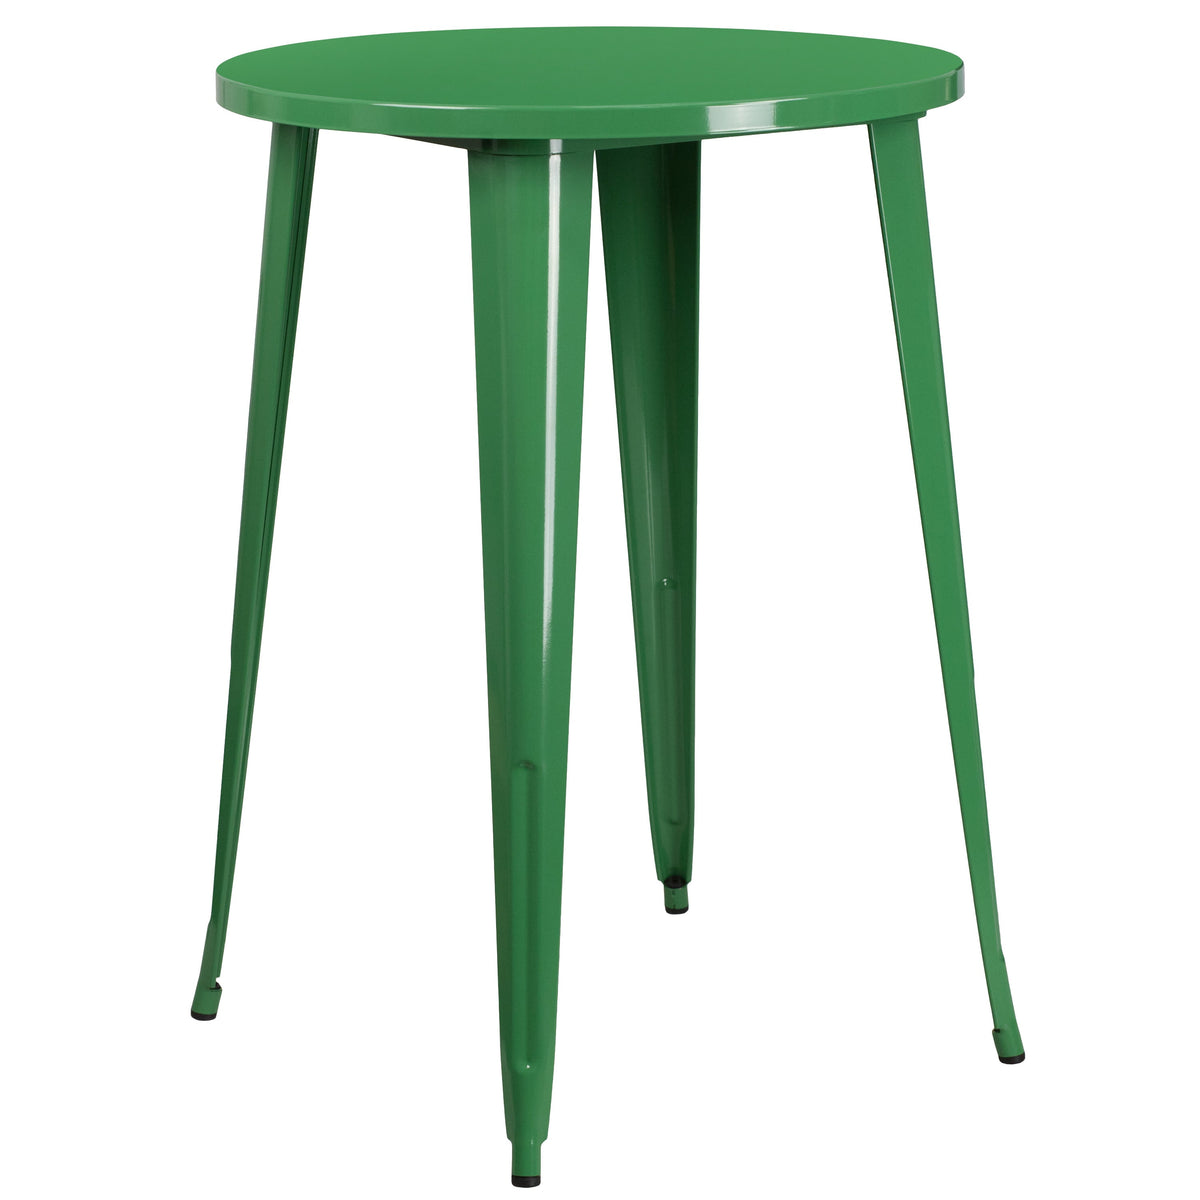 Green |#| 30inch Round Green Metal Indoor-Outdoor Bar Table Set with 2 Backless Stools